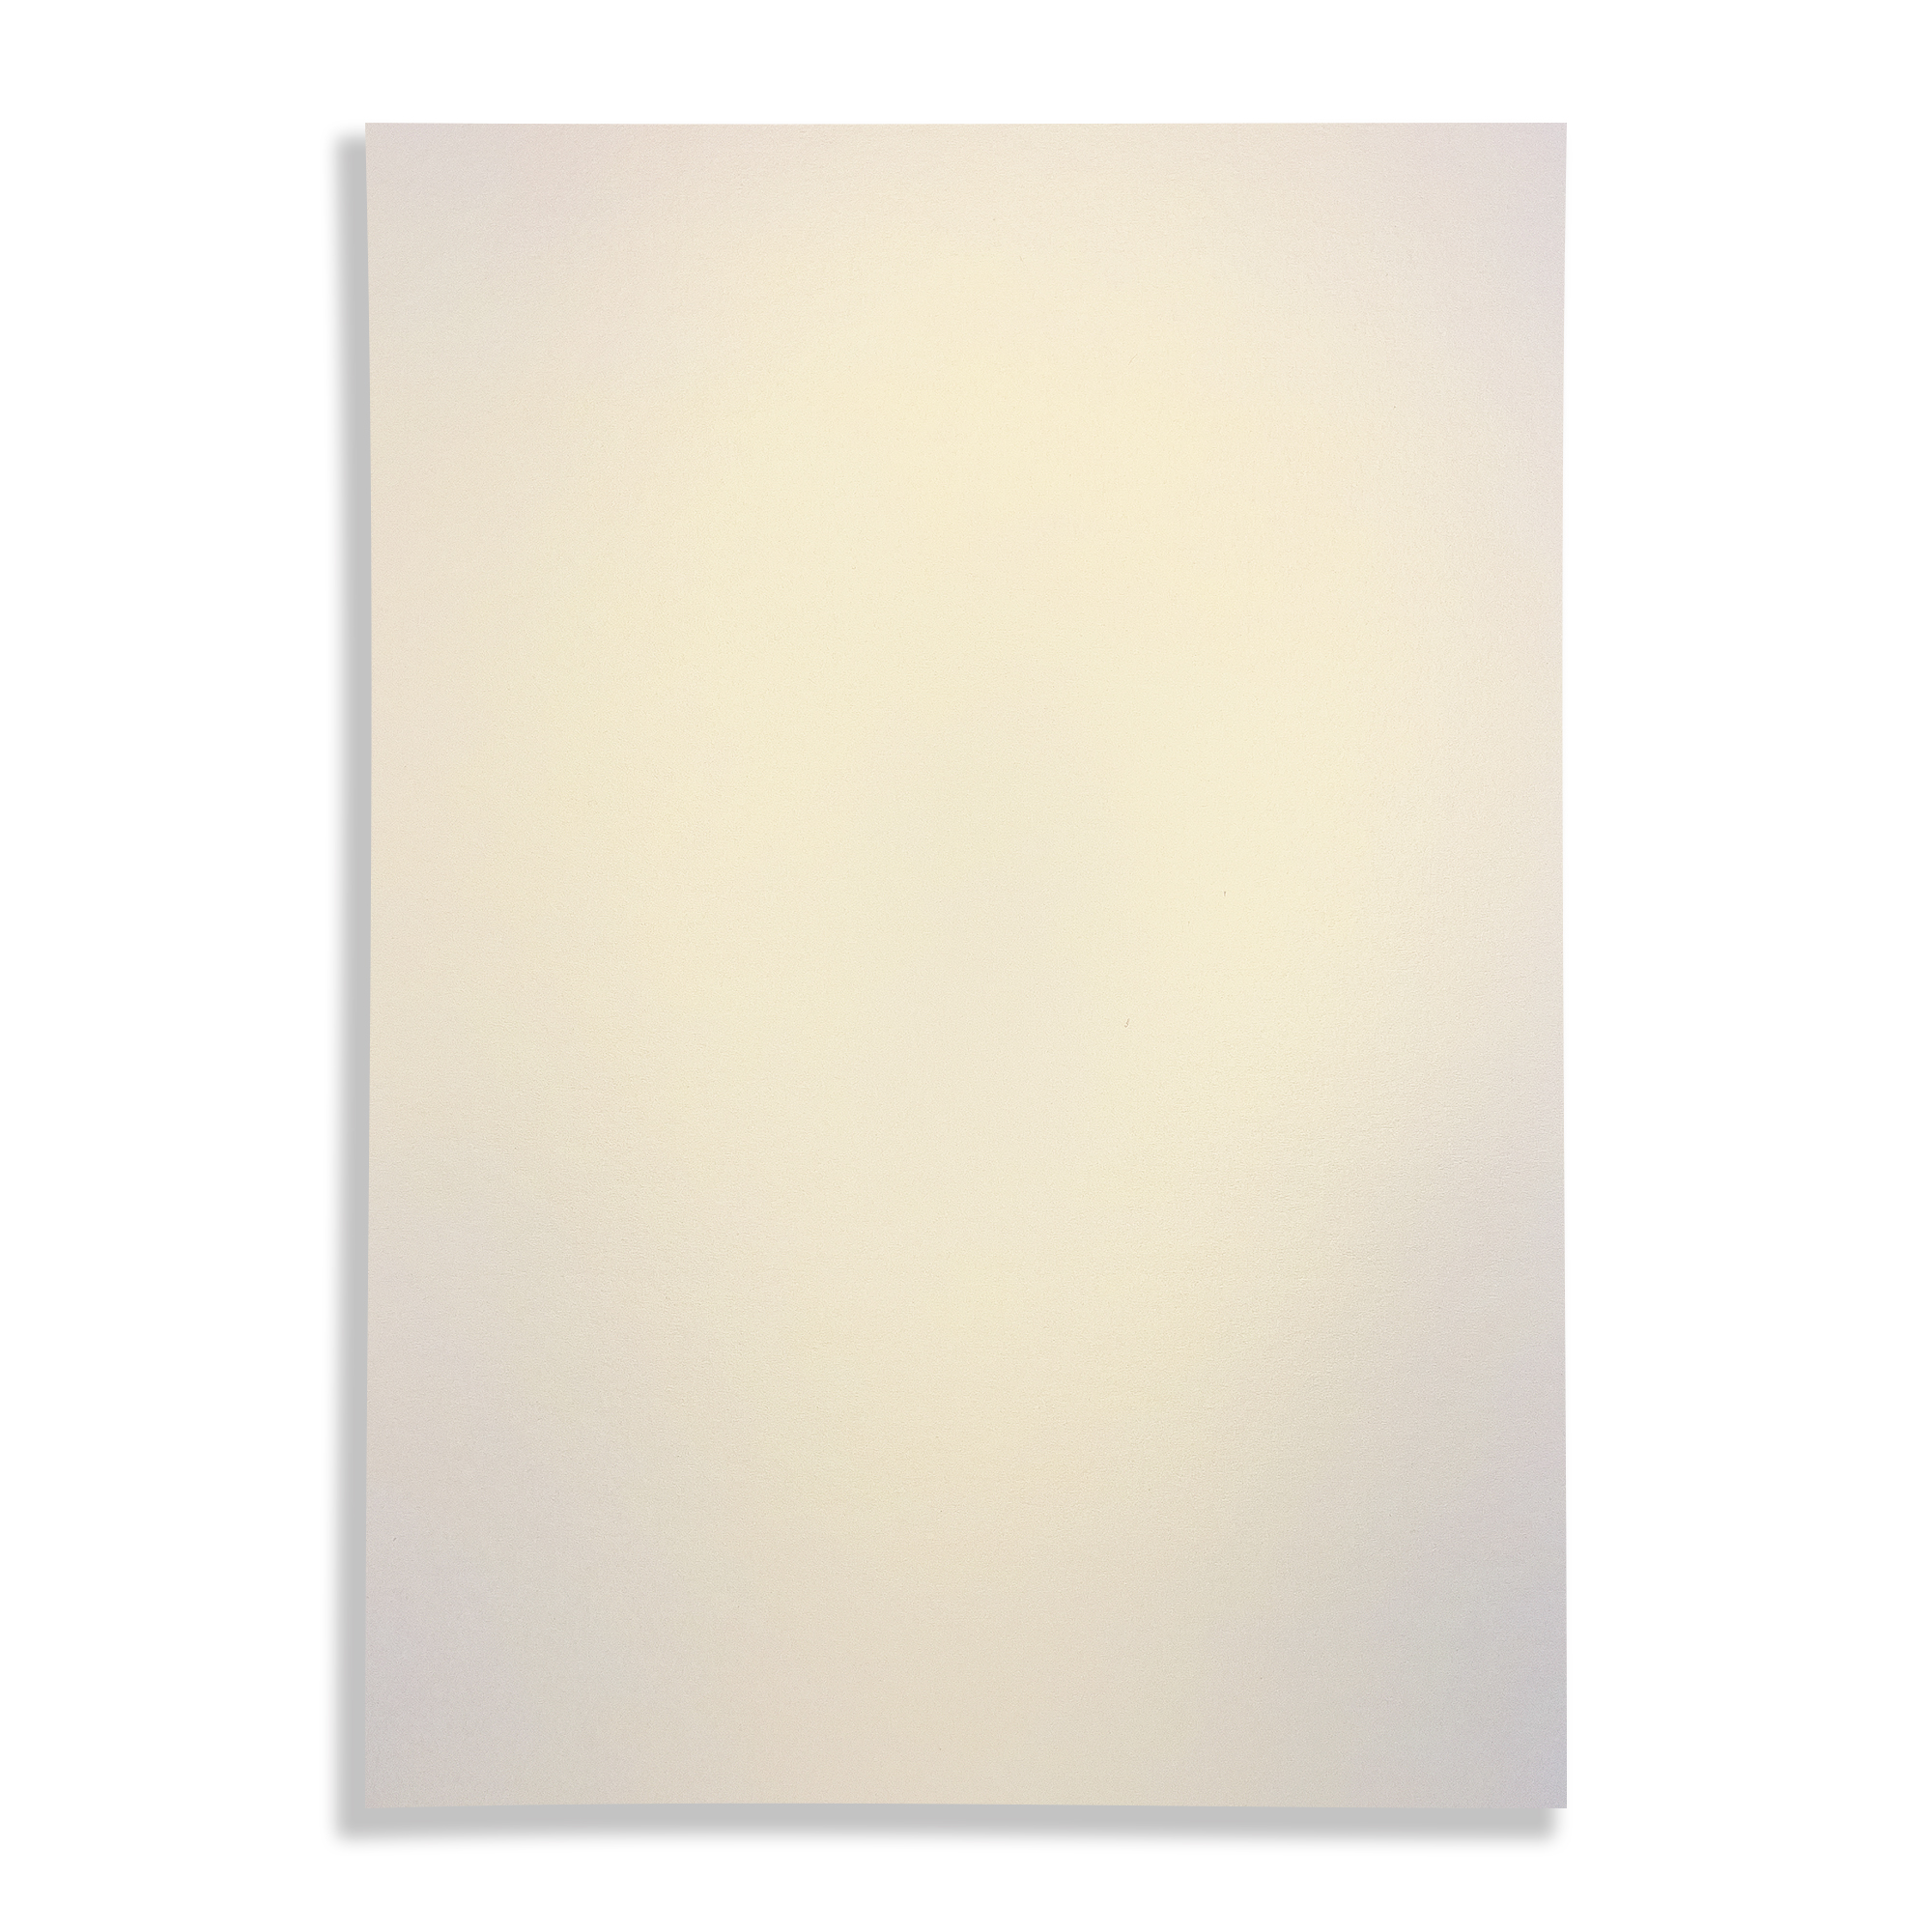 A4 COSMOS Pearl 300gsm Double-Sided Card – Gold White